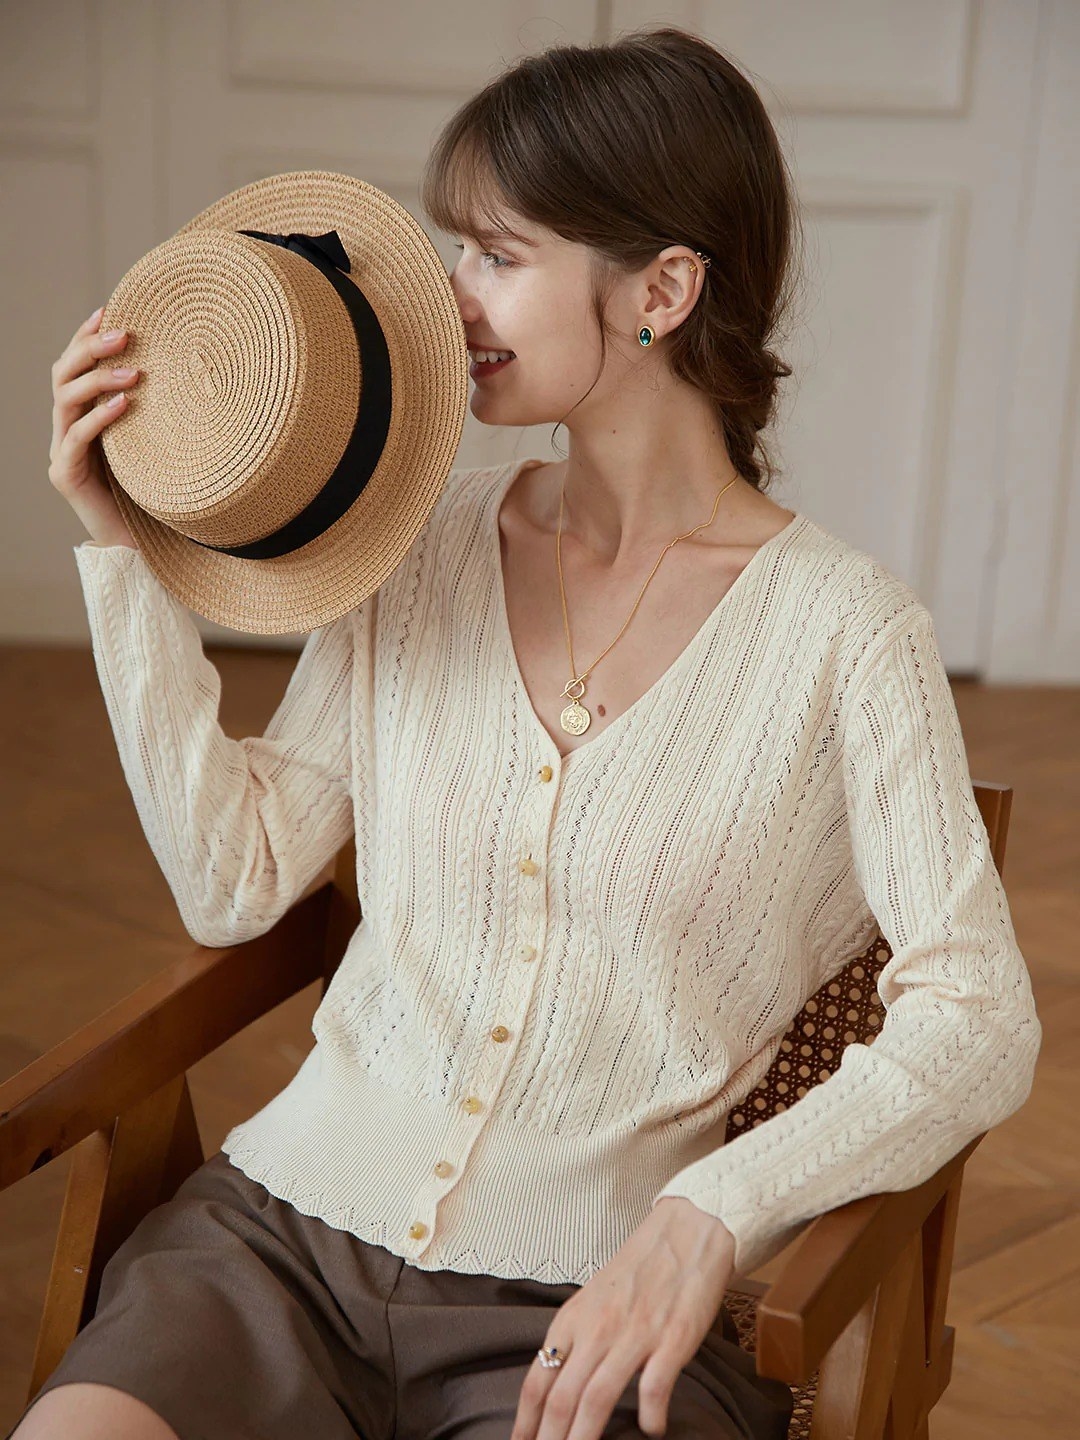 model wearing the apricot cable knit cardigan holding up a straw hat